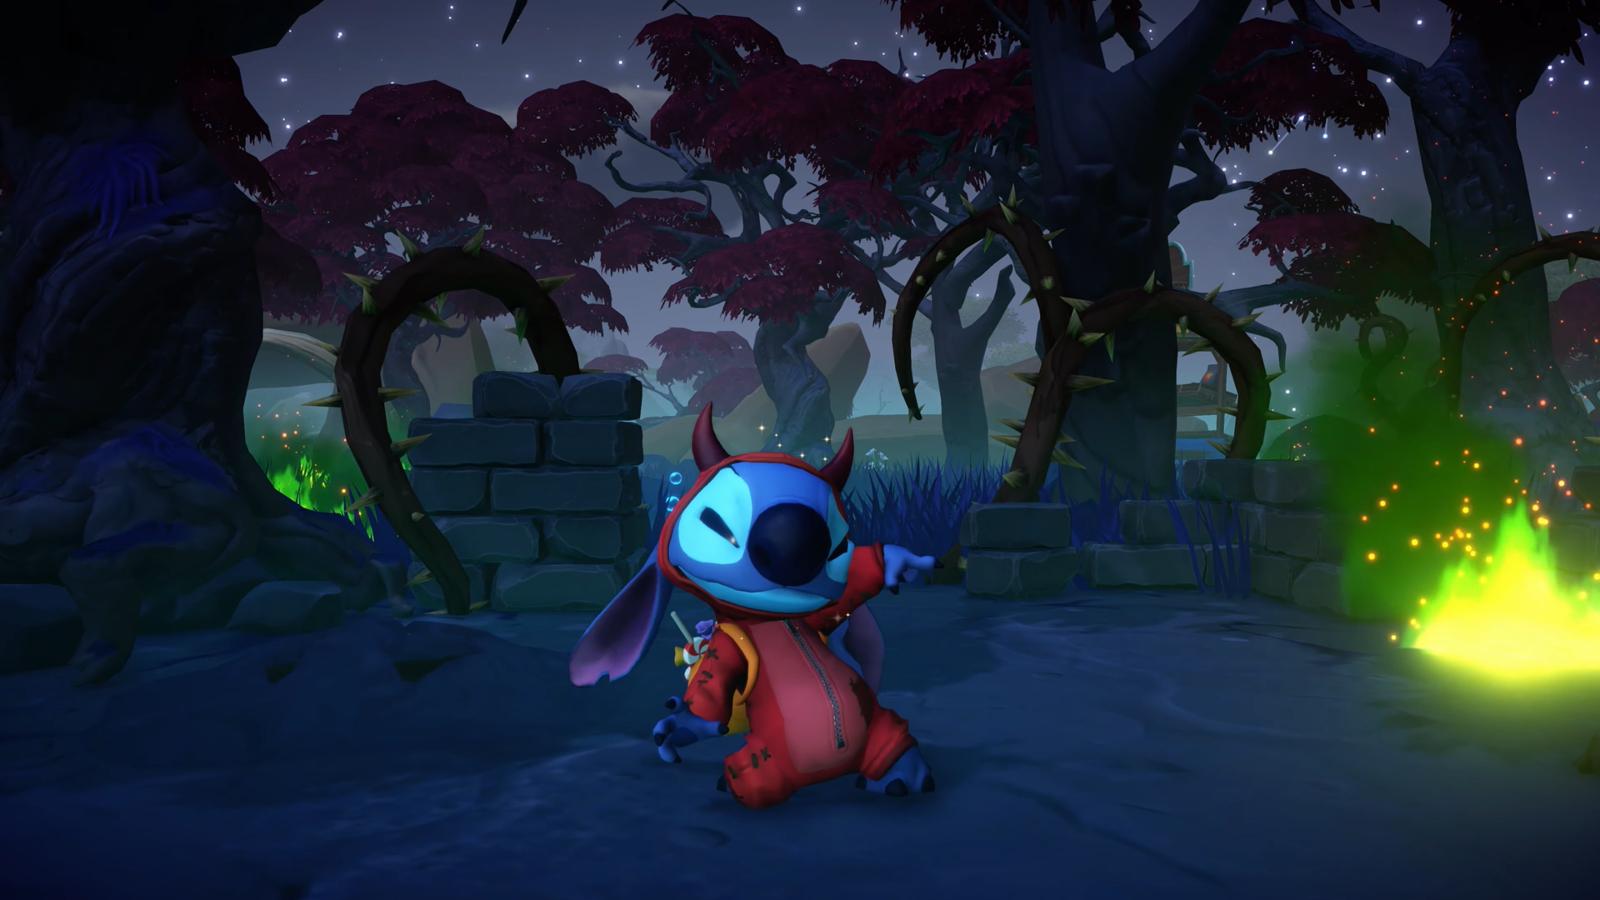 Stitch in Dreamlight Valley dressed as a devil